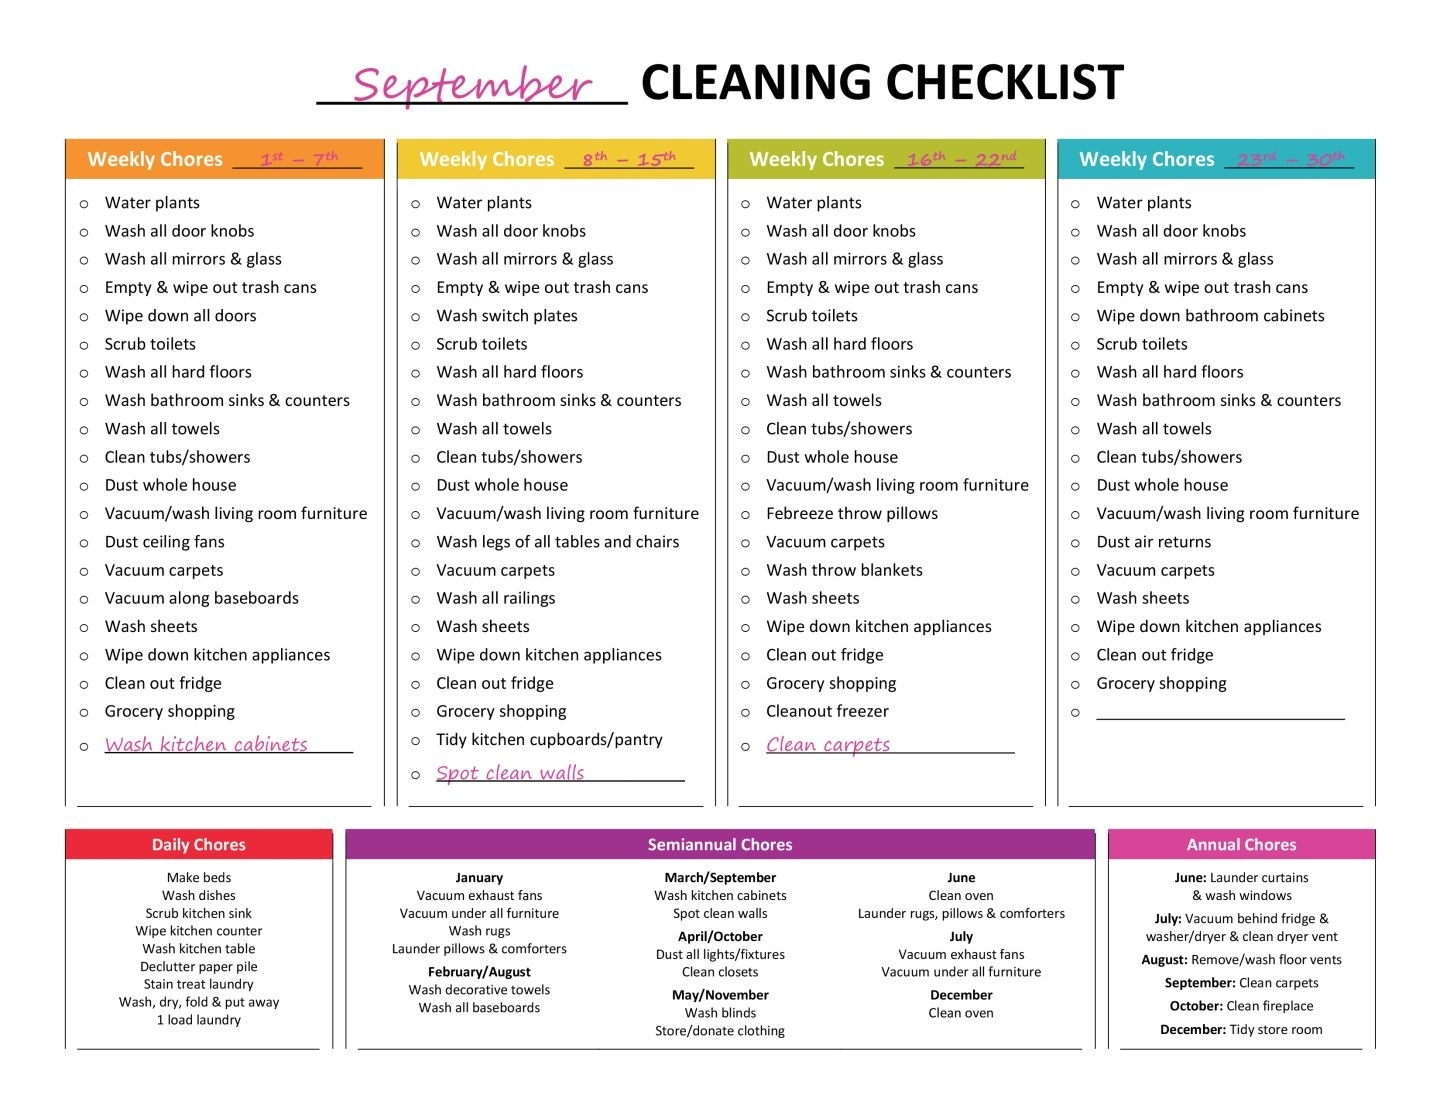 Complete Housekeeping Printable Set! | Getting Organized | Pinterest Monthly Calendar Household Chores